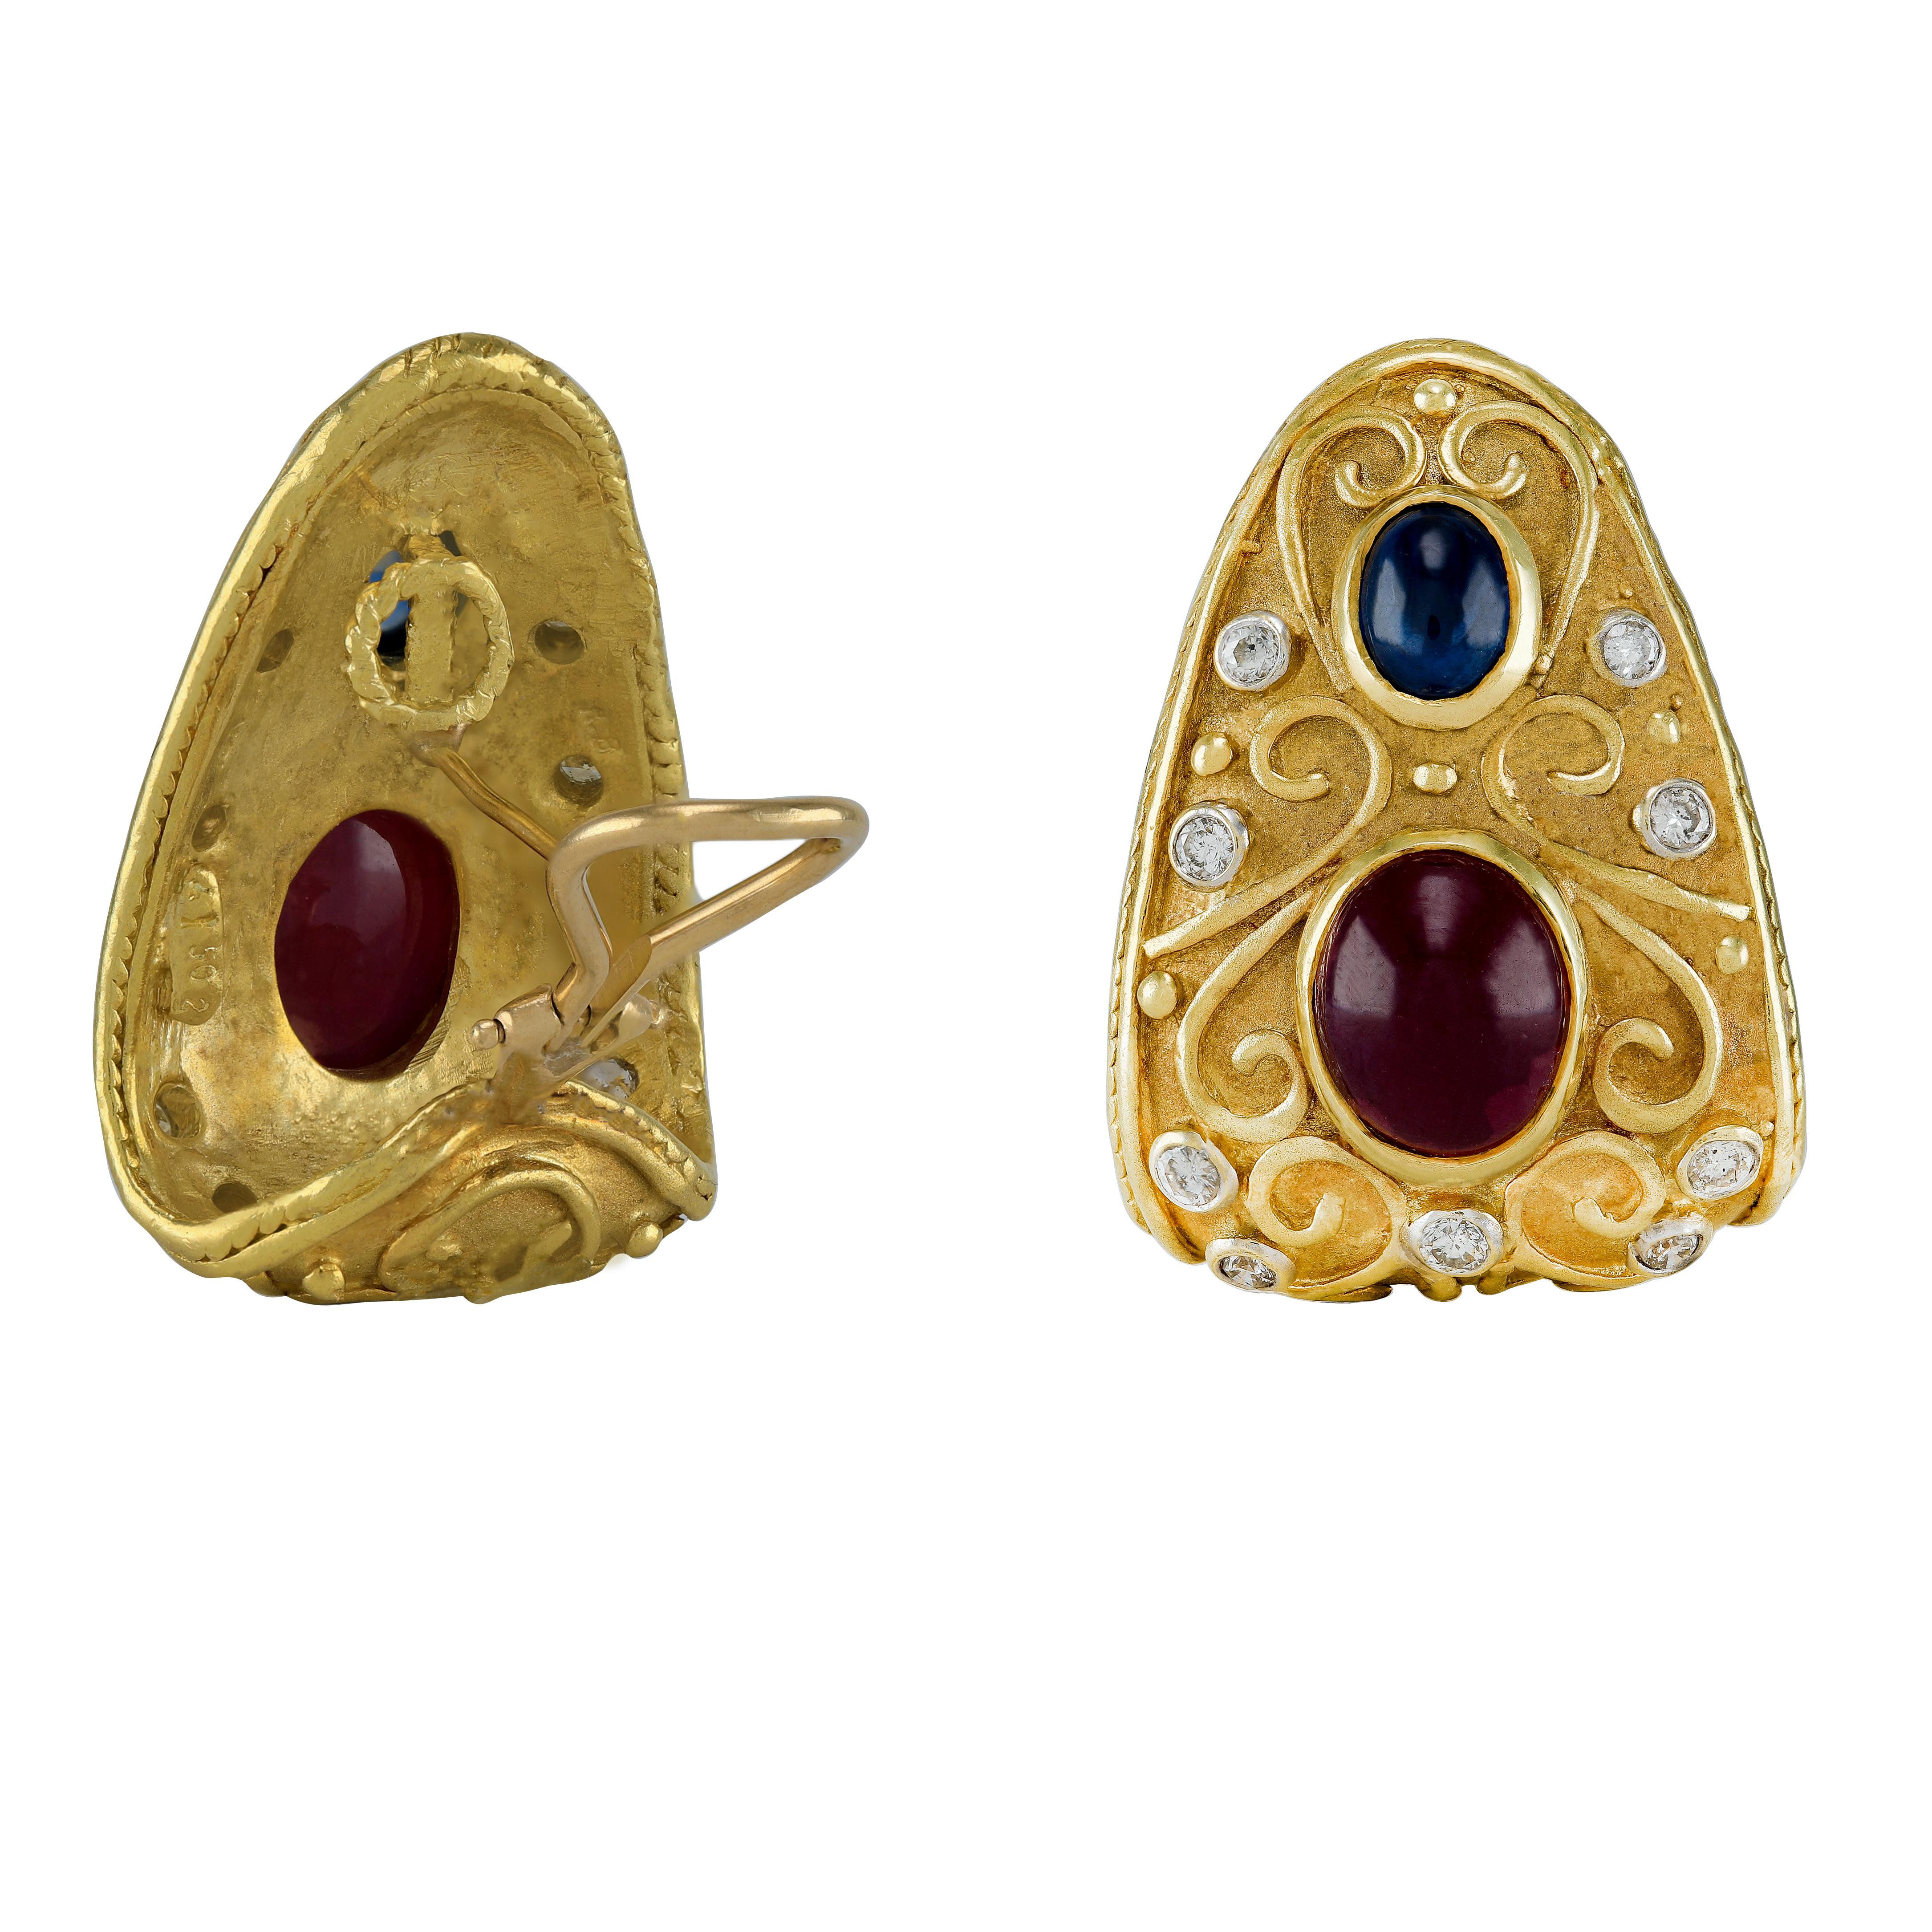 Etruscan 18k Cabochon Ruby and Sapphire Dimond Earring
Stunning bold earrings that will make a outstanding statement. A beautiful pair of well made handcrafted 18k solid gold earrings weighing a total of 31.1 grams. These beautiful Etruscan revival